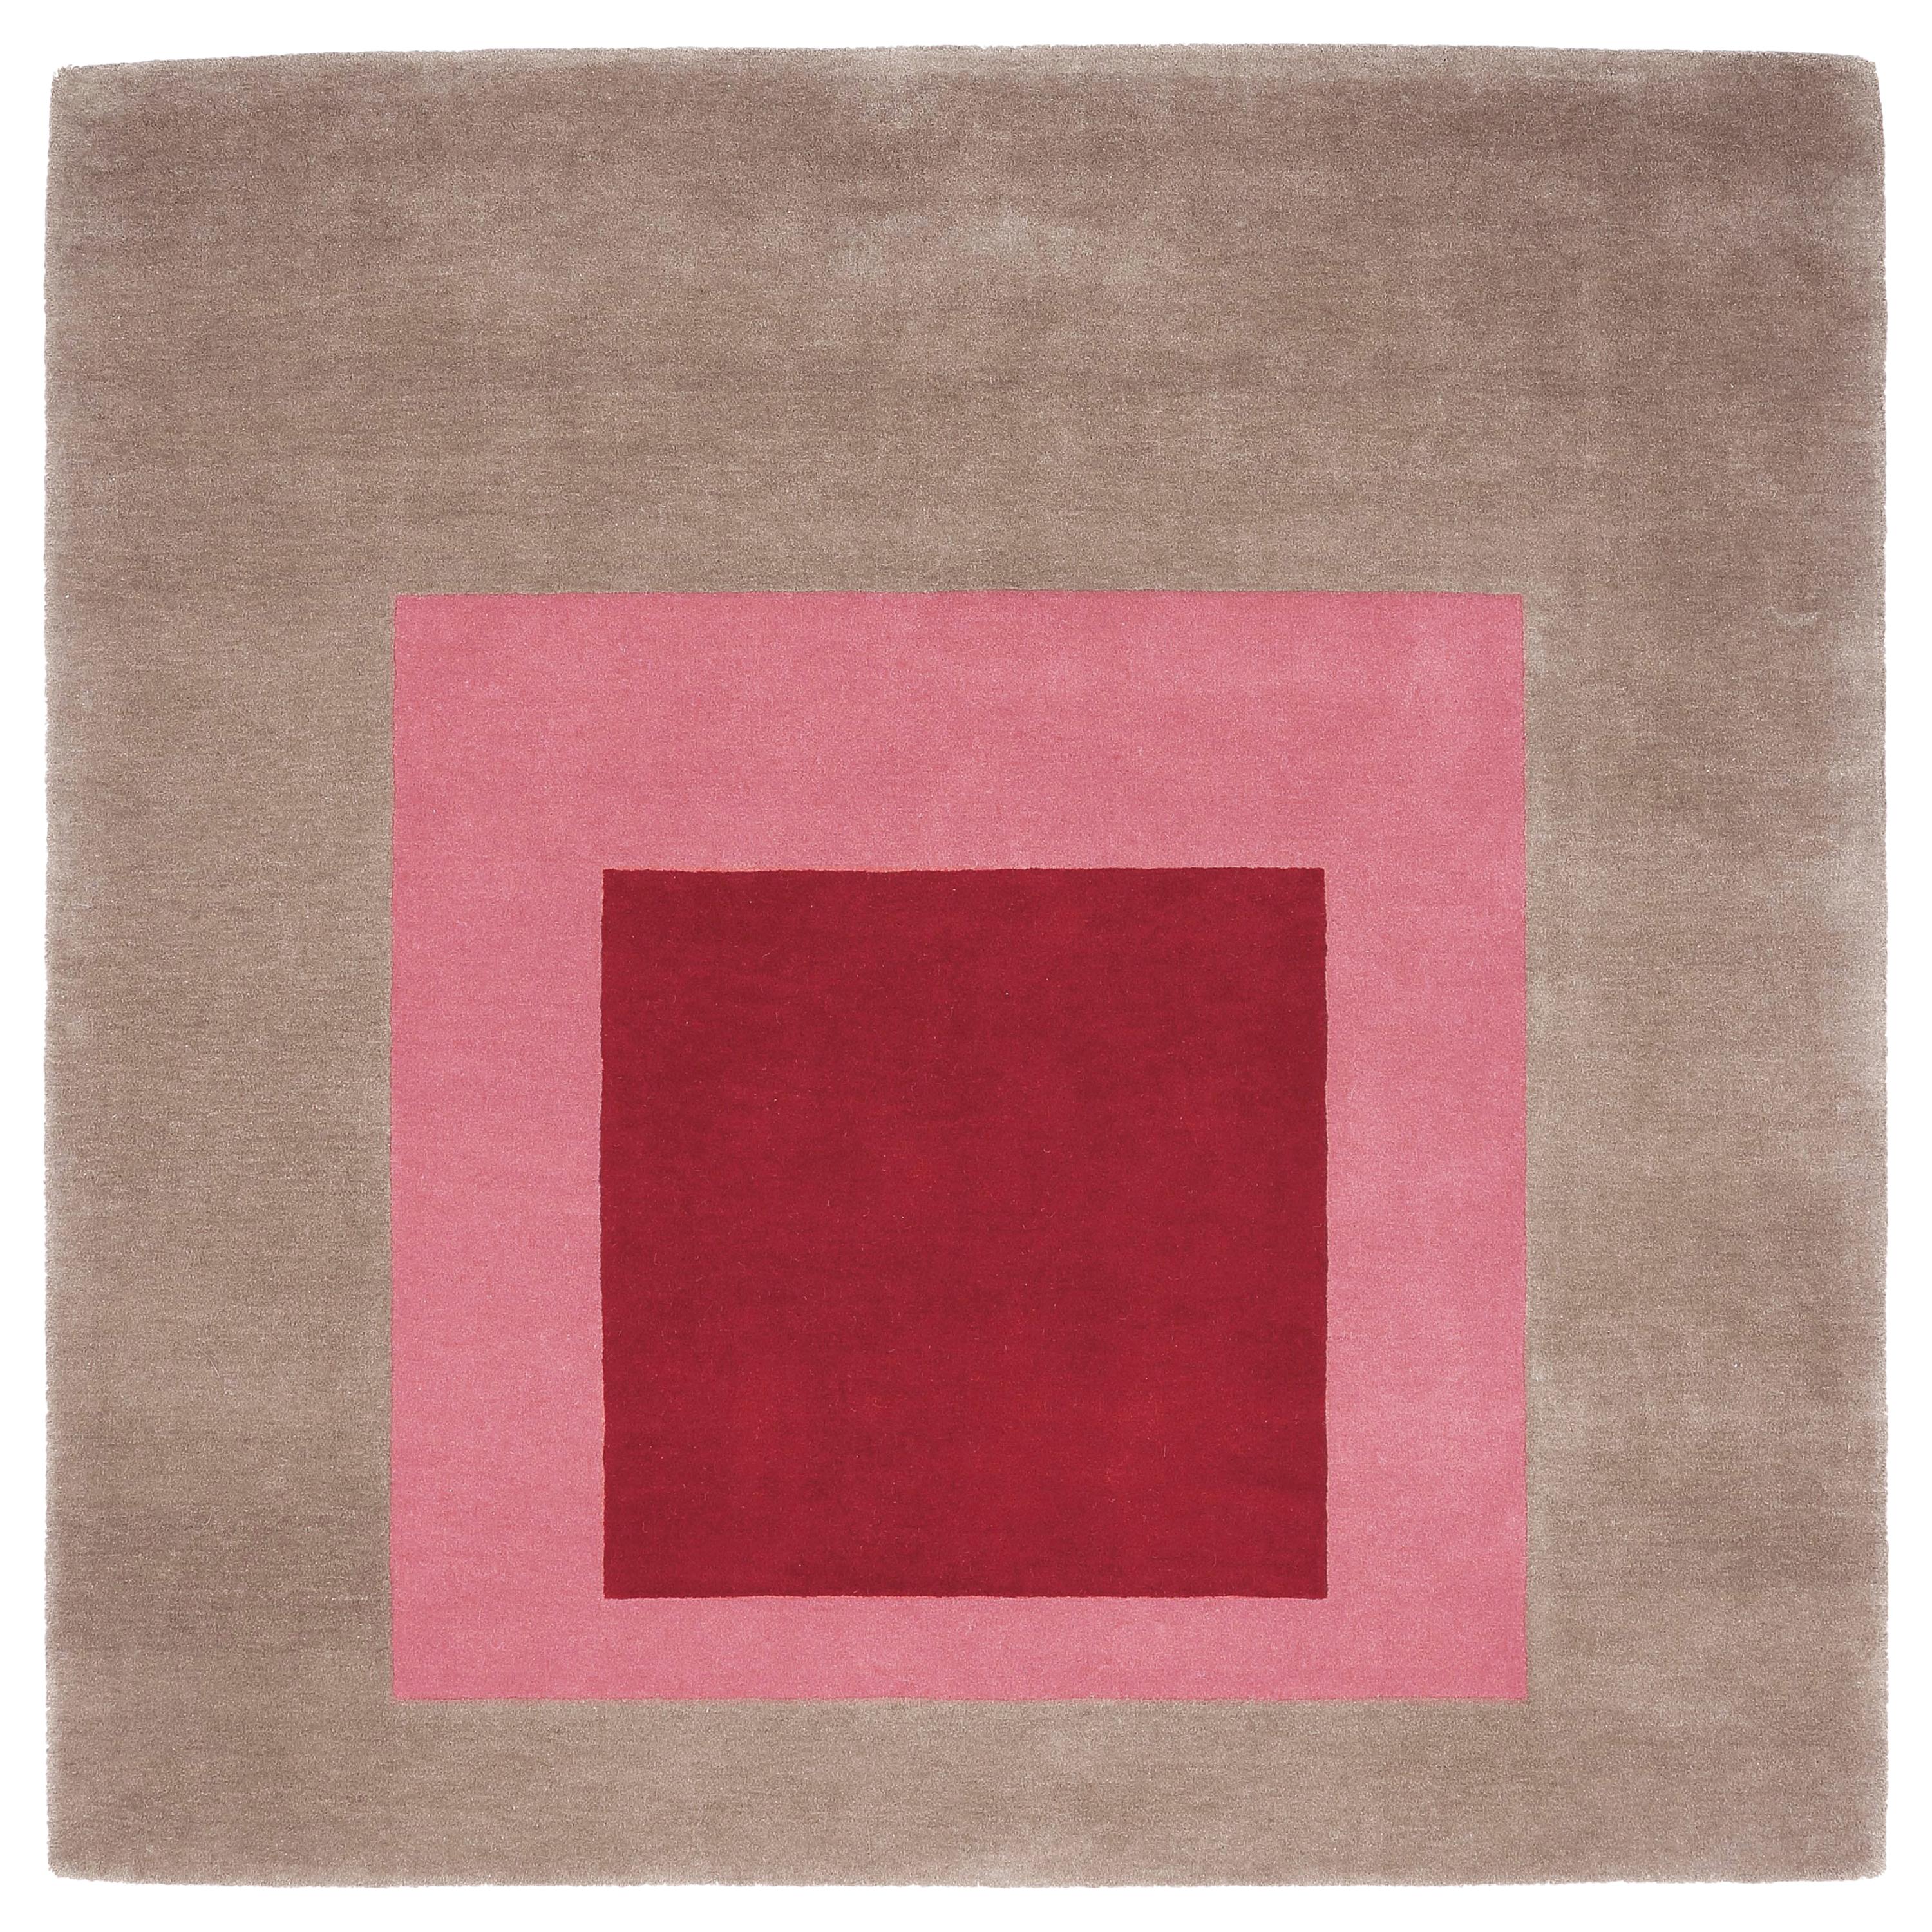 Homage to the Square Rug 'Beige/Pink/Burgundy' by Josef Albers